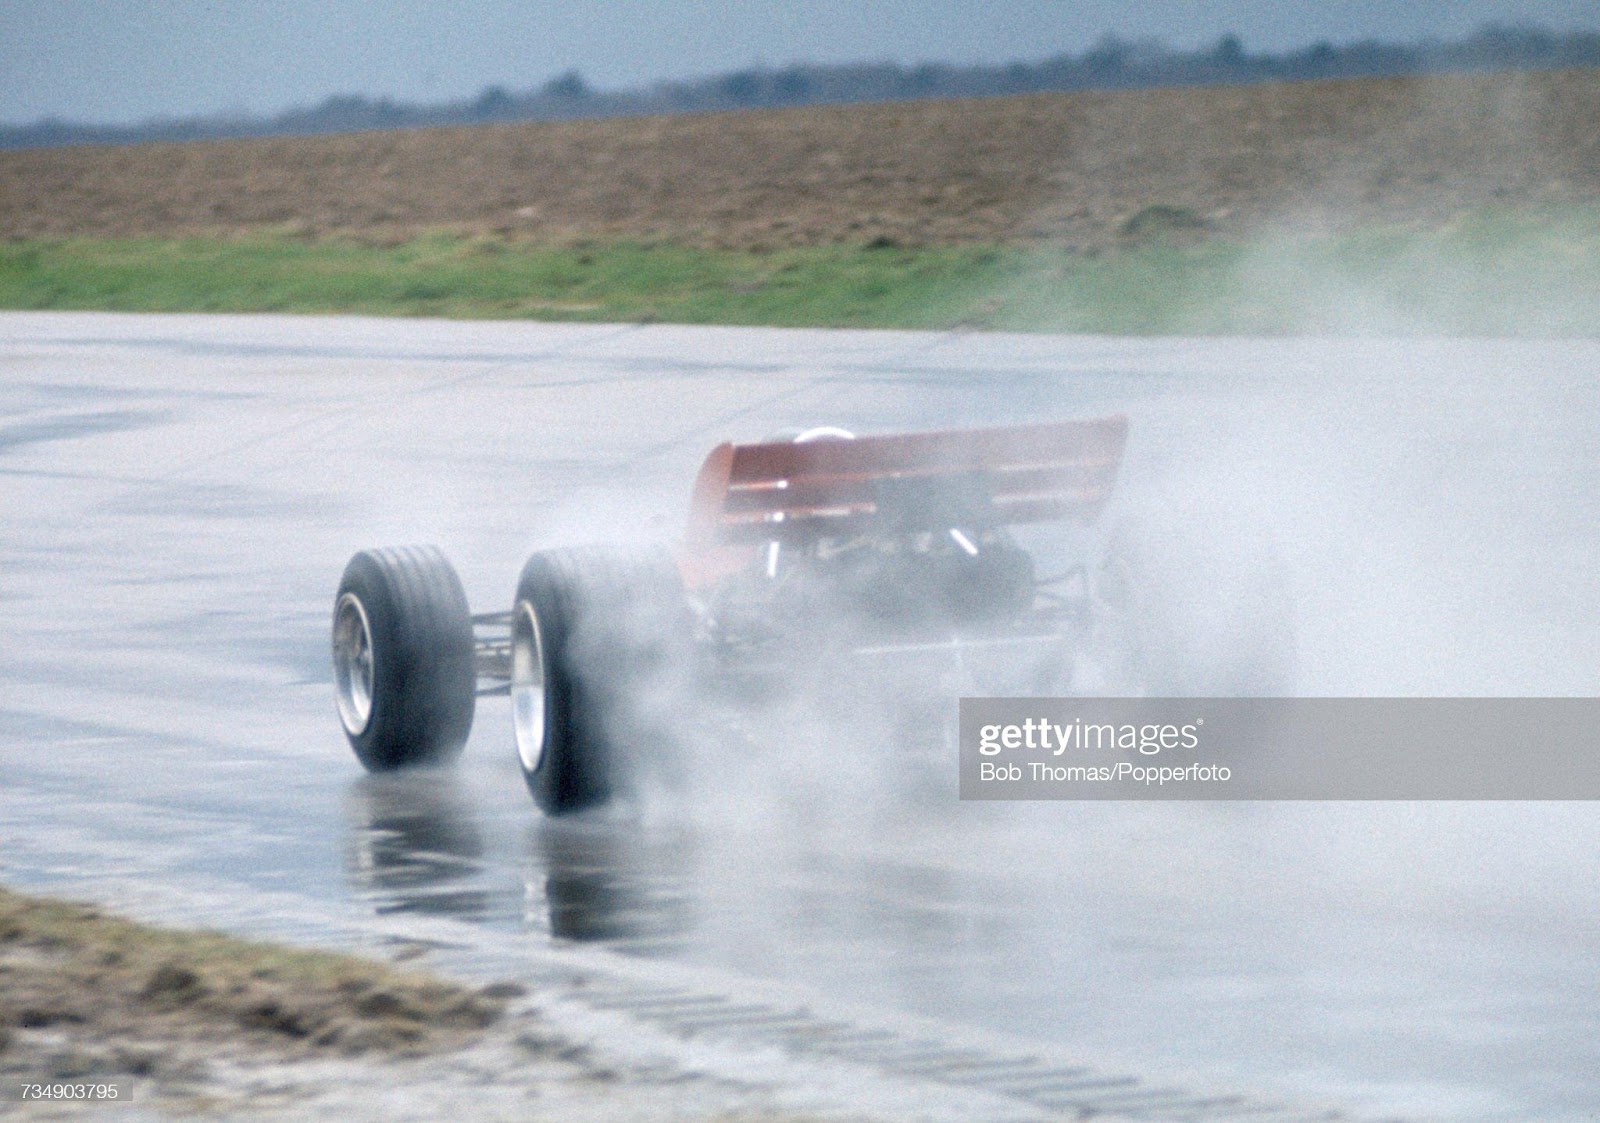 View of the Lotus 72 F1 racing car being driven in testing on the rain soaked track at Silverstone motor racing circuit near Towcester, England circa 1970. Racing drivers Jochen Rindt and John Miles would compete in the Lotus 72 car during the 1970 season.